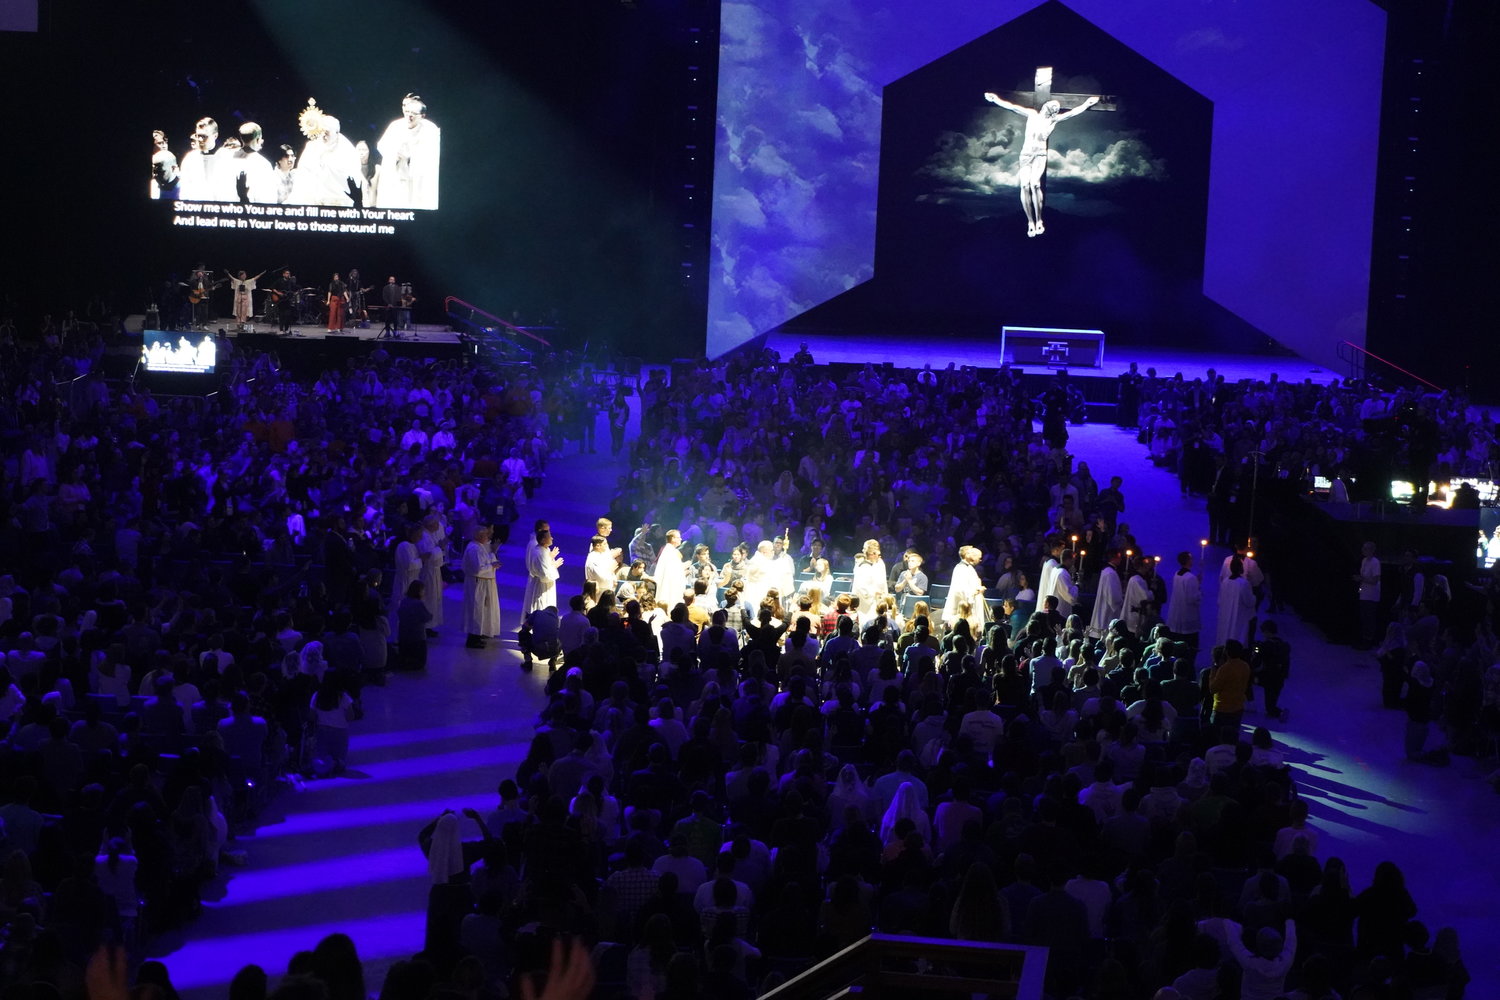 Priests carry the Most Blessed Sacrament around the floor and through the crowd in the Dome at the America’s Center in St. Louis Jan. 6 during Adoration attended by over 17,000 people during the SEEK23 conference organized by the Fellowship of Catholic University Students (FOCUS).